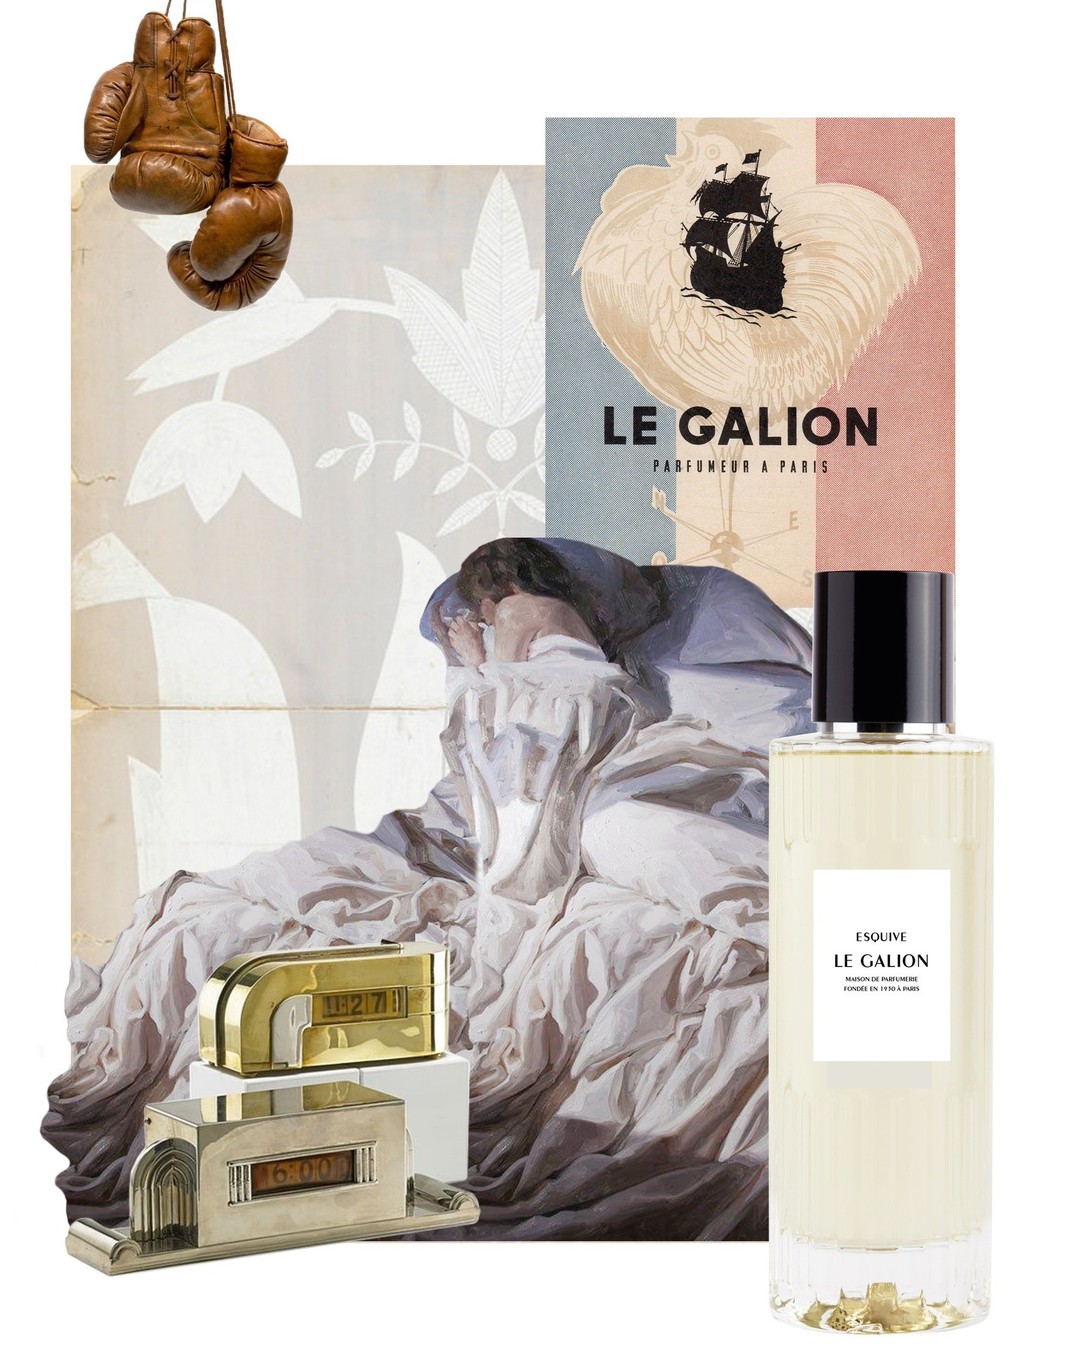 ESQUIVE
From animal origins to synthetic creations, for centuries musk has mimicked the smell of skin, from the 1930s’ almost shocking animalic ones to the softer, freshly-showered white musks of the 2010s. 

In 2020 Jean-Christophe Hérault writes the scented tale of a sensuality that has travelled through the ages and kingdoms to culminate in a pure Leather accord, with deeply resonating Patchouli scents modernised by clean accents from an immaculate laundry blend brightened by Pink Peppercorn. A combination of skin scents echoing between centuries, like a parade, a subterfuge, impossible to catch...

♥︎ Head Notes / Accord clean linen, Pink pepper, cashmeran
♥︎ Heart Notes / Leather, Musks
♥︎ Base Notes / Ambrette, Vetiver, patchouli

#legalion #legalionparis #esquive #musk #patchouli #france #frenchperfume #perfume #perfumelovers #fragrance #fragrancelover #madeinfrance